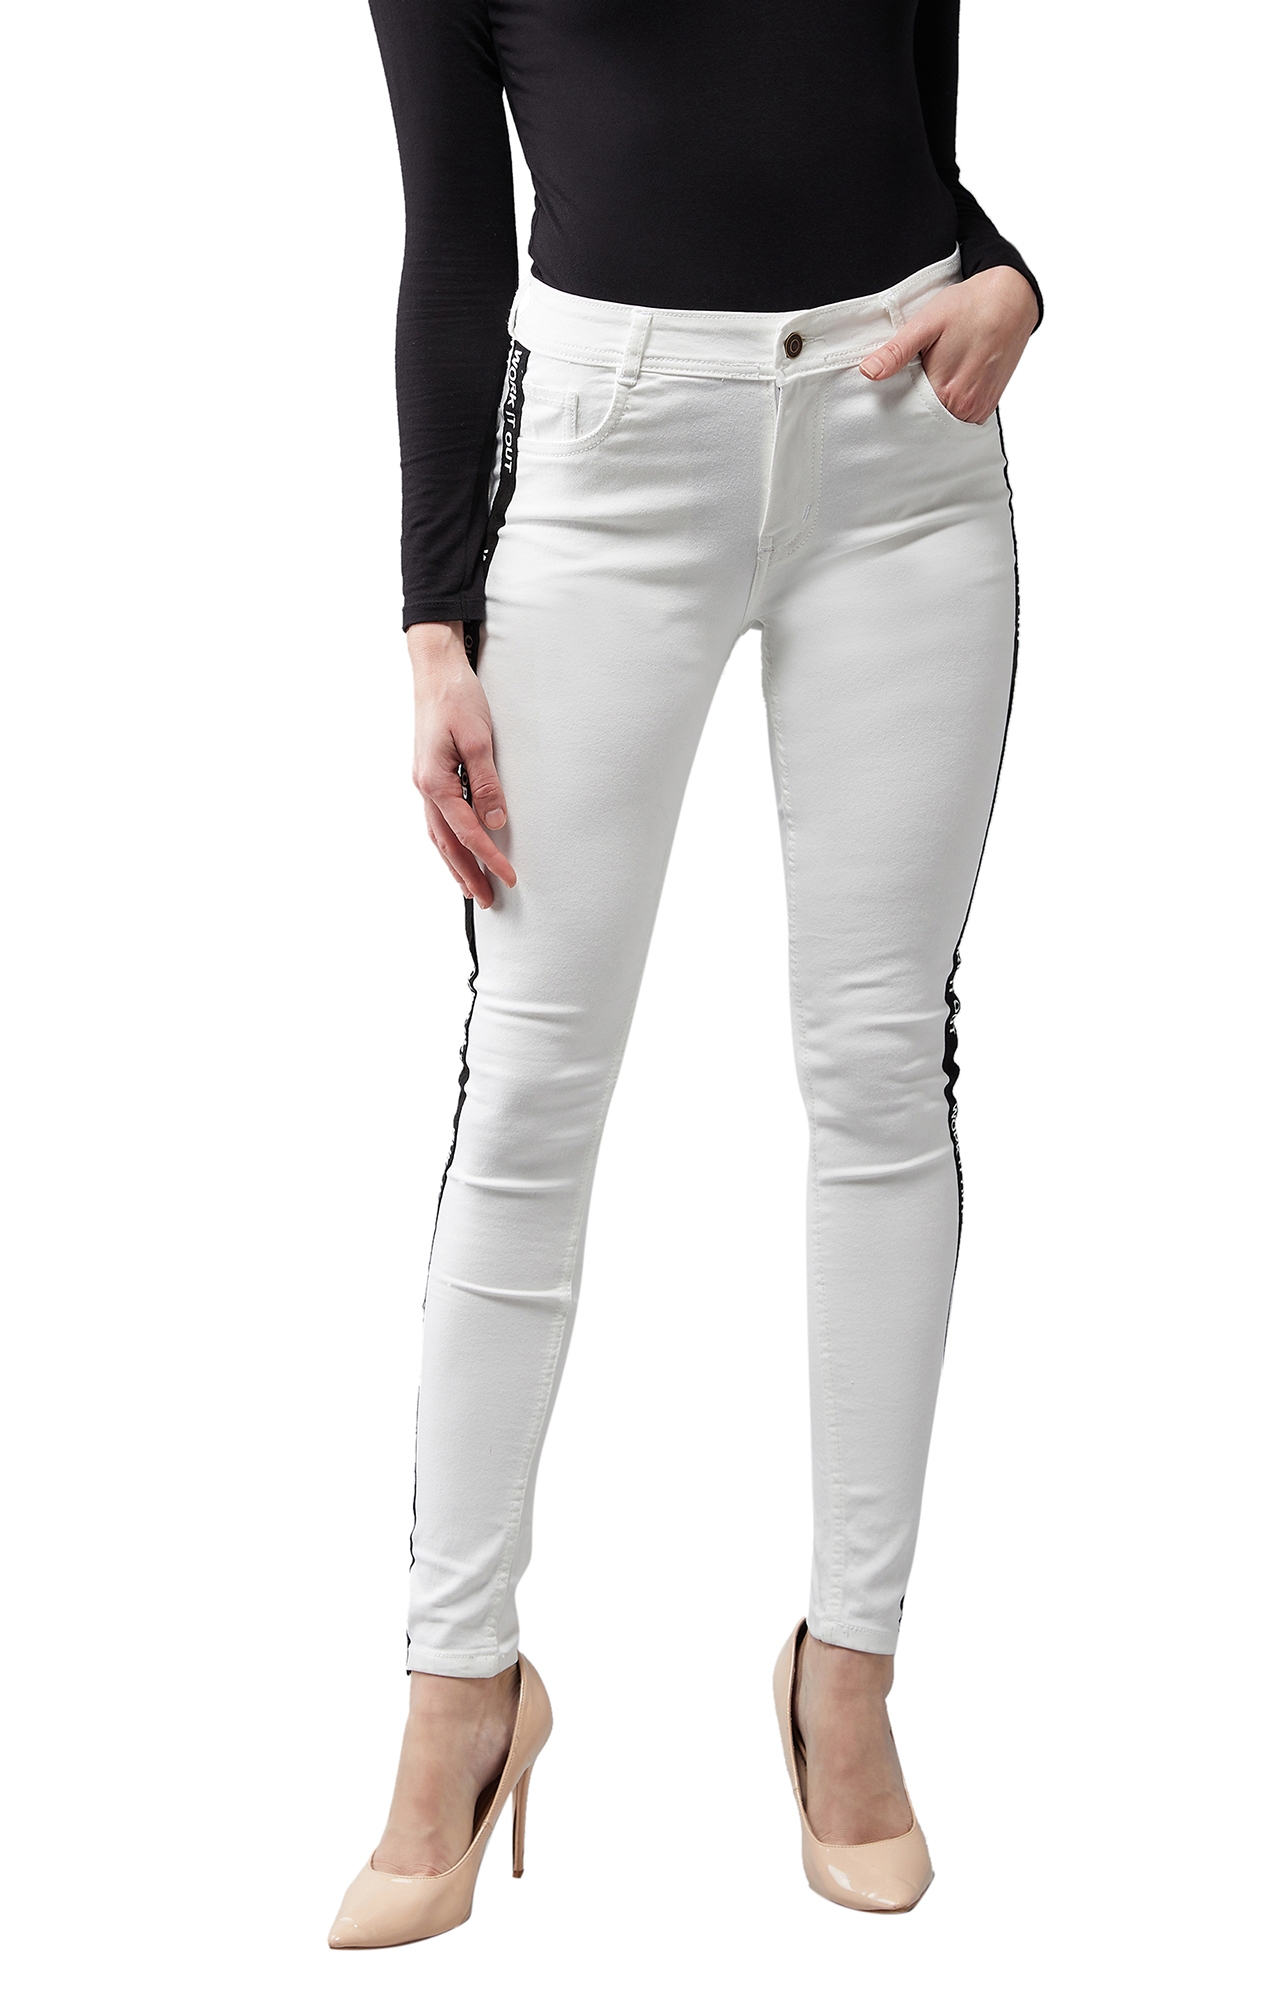 Women's White Skinny Mid Rise Clean Look Printed Twill Tape Detailing Bleached Regular Length Stretchable Denim Jeans